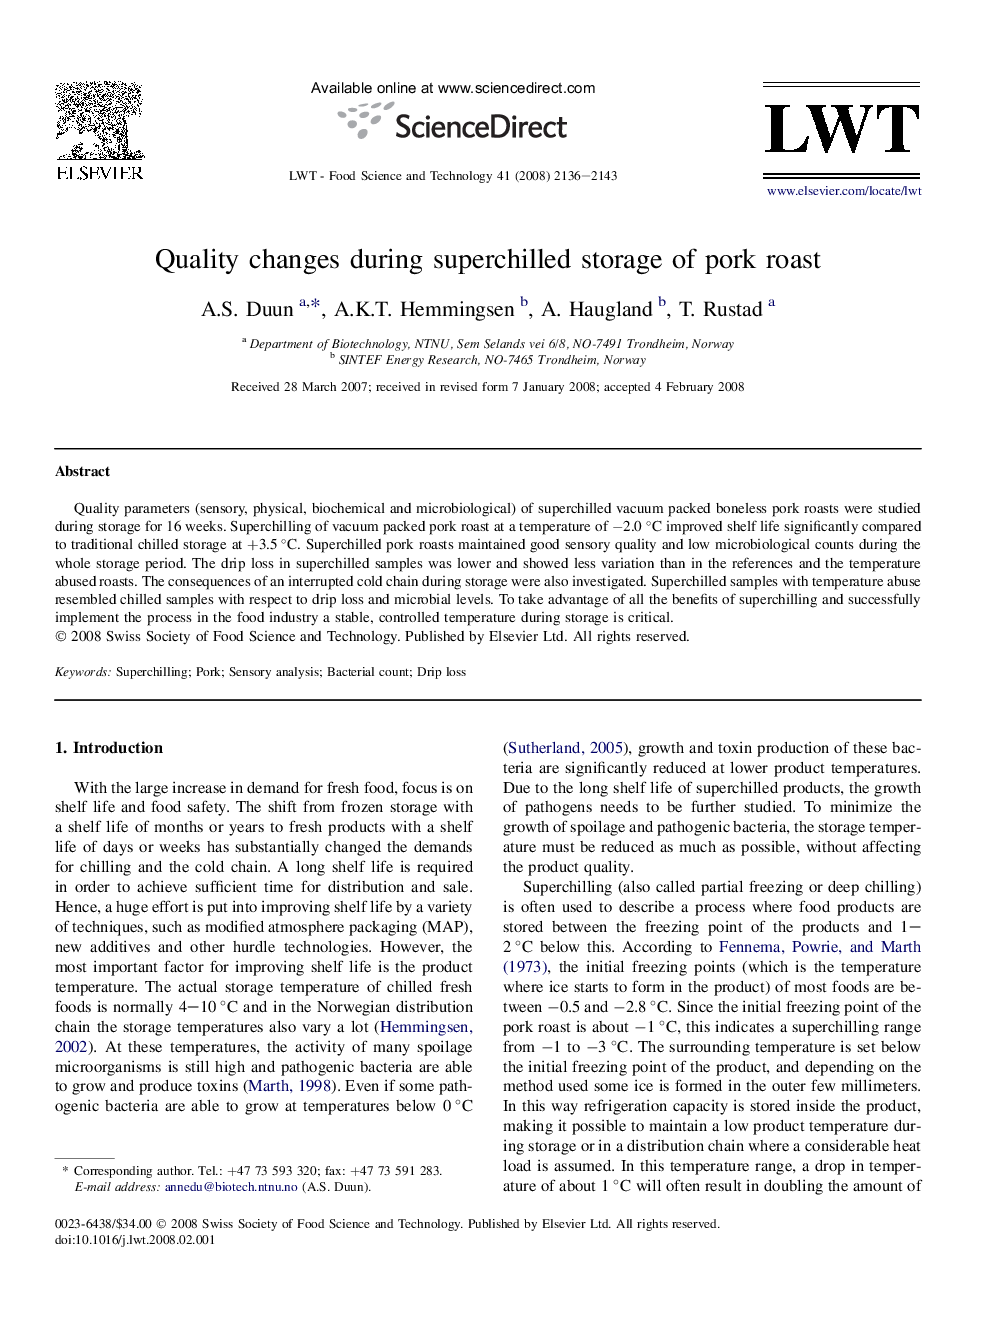 Quality changes during superchilled storage of pork roast